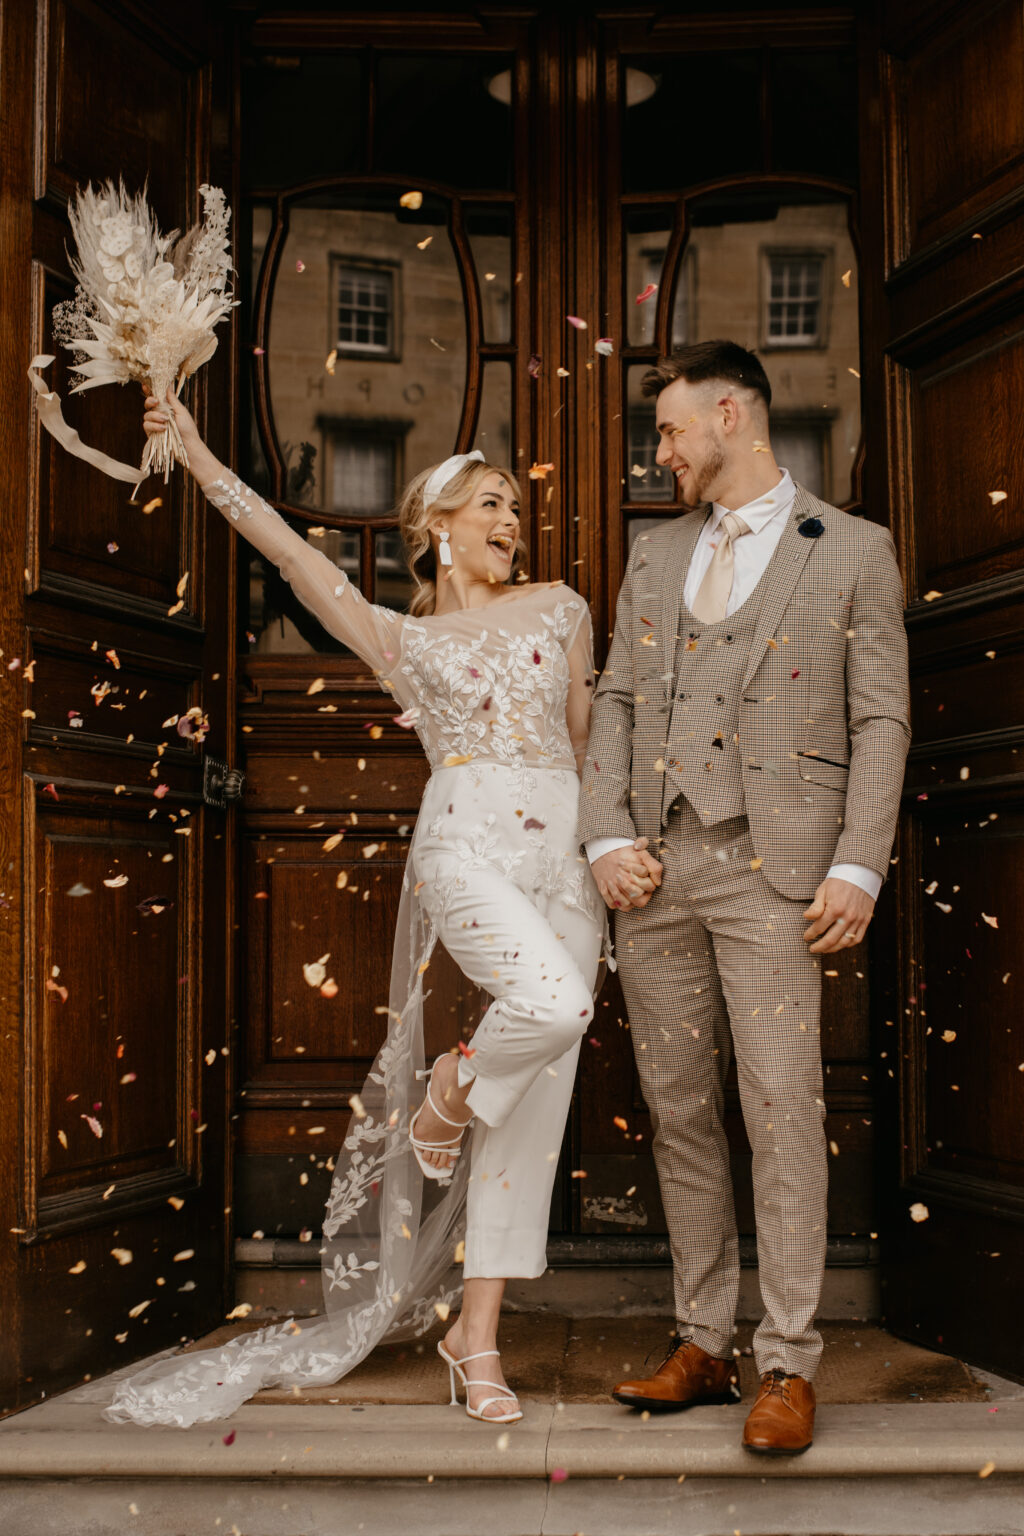 City Elopement With Bridal Jumpsuit and Vintage Wedding Car In Bath